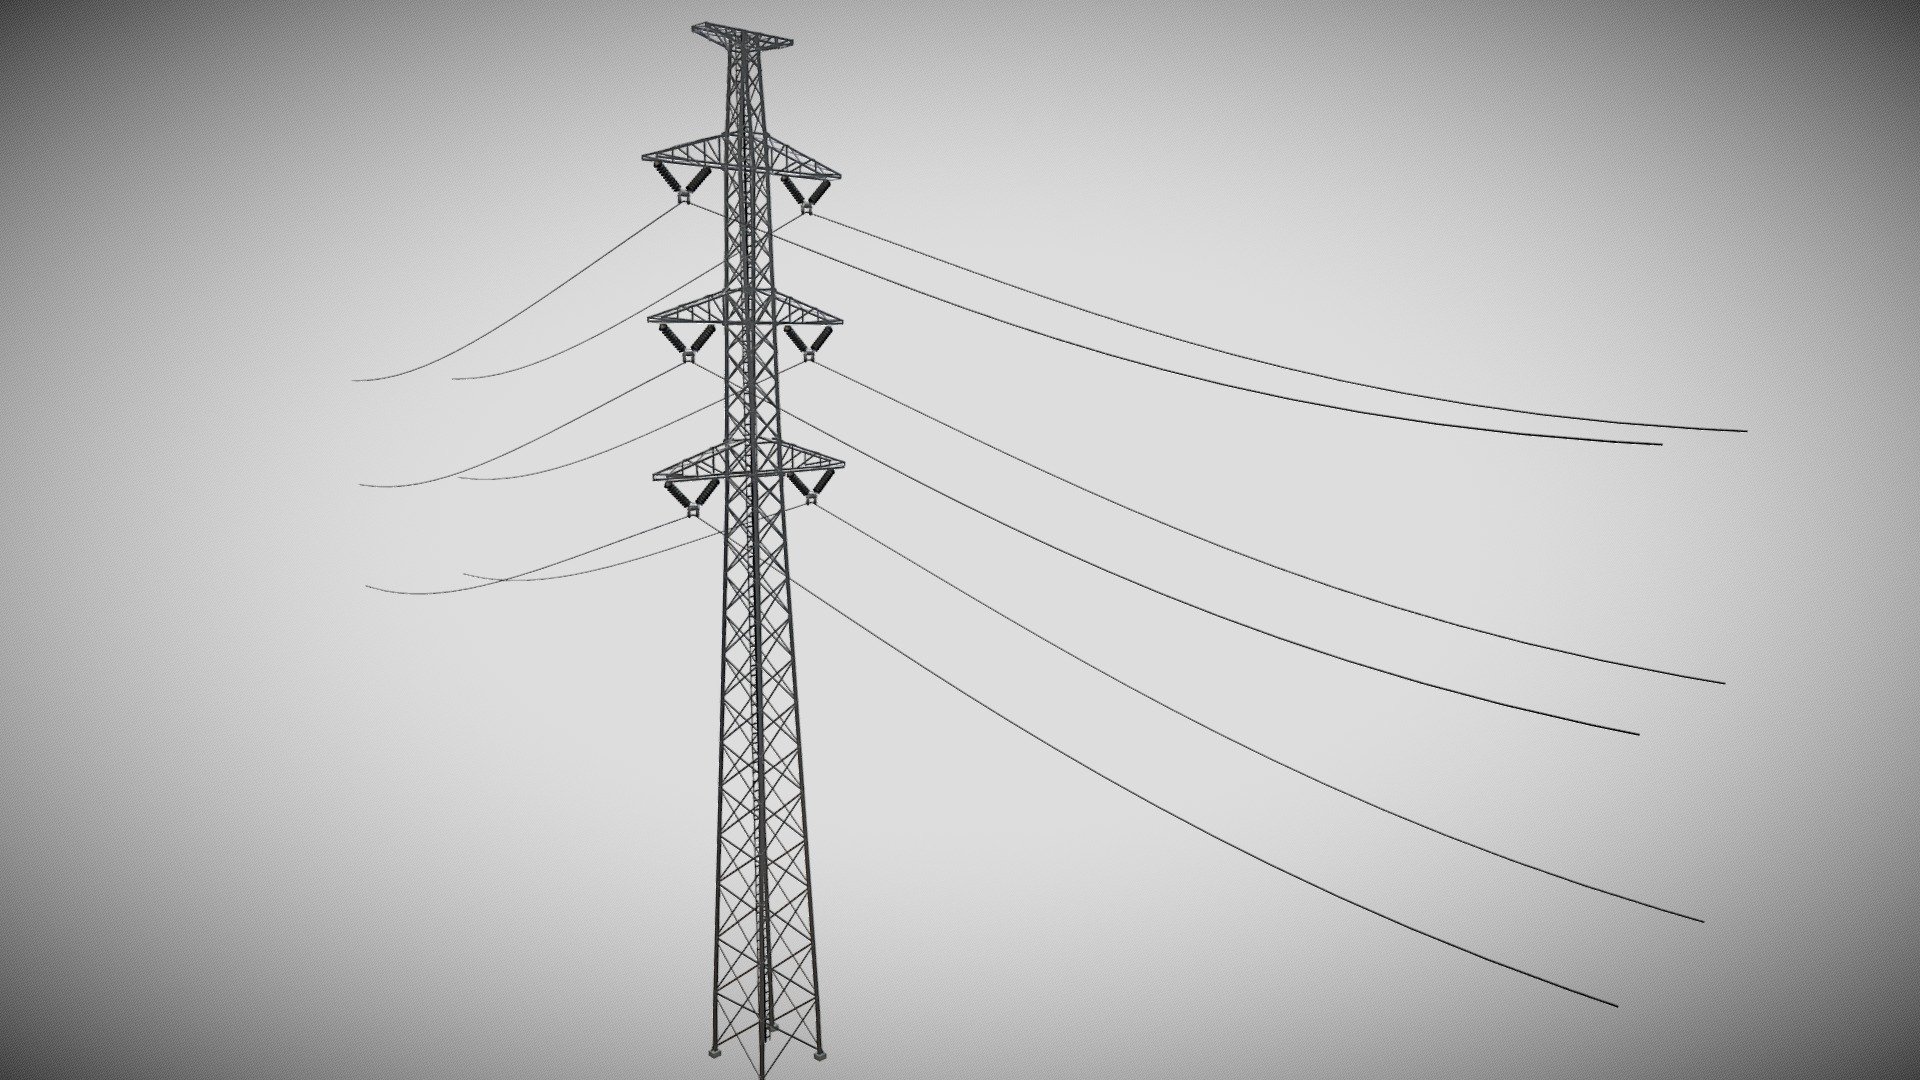 30m (150ft) Tall Double Circuit High-Voltage Power line with hanging 3 layers of hanging electric wires
The powerlines are matching seamlessly to the next tower's powerlines when the towers are put in line.

Includes:
High Poly model
3 material slots (no textures)
*2K HDRI

File formats:
Blend (original)
Dae
FBX
OBJ - Double Circuit Powerline - Buy Royalty Free 3D model by MarkoJantti 3d model